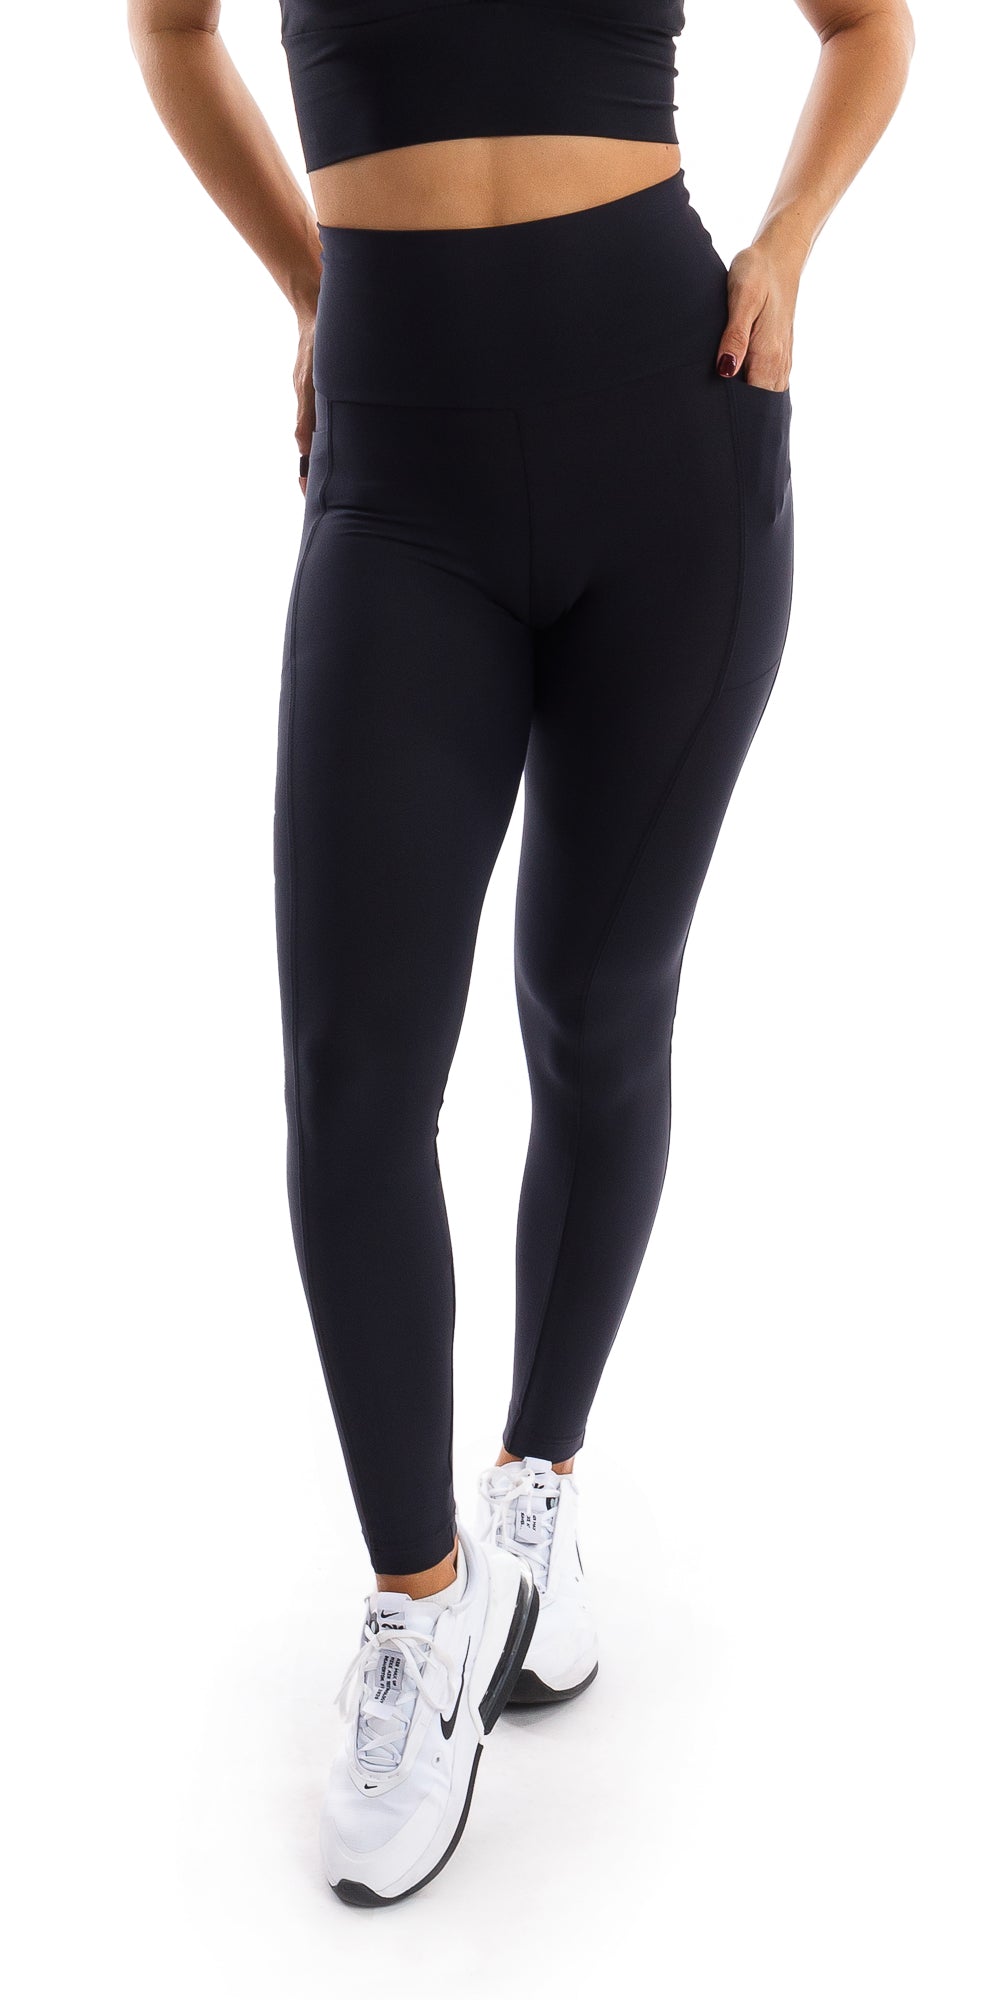 Front view of girl wearing black Midnight Eco Ultra High Waist Leggings with Pockets putting one hand in pocket and one leg forward